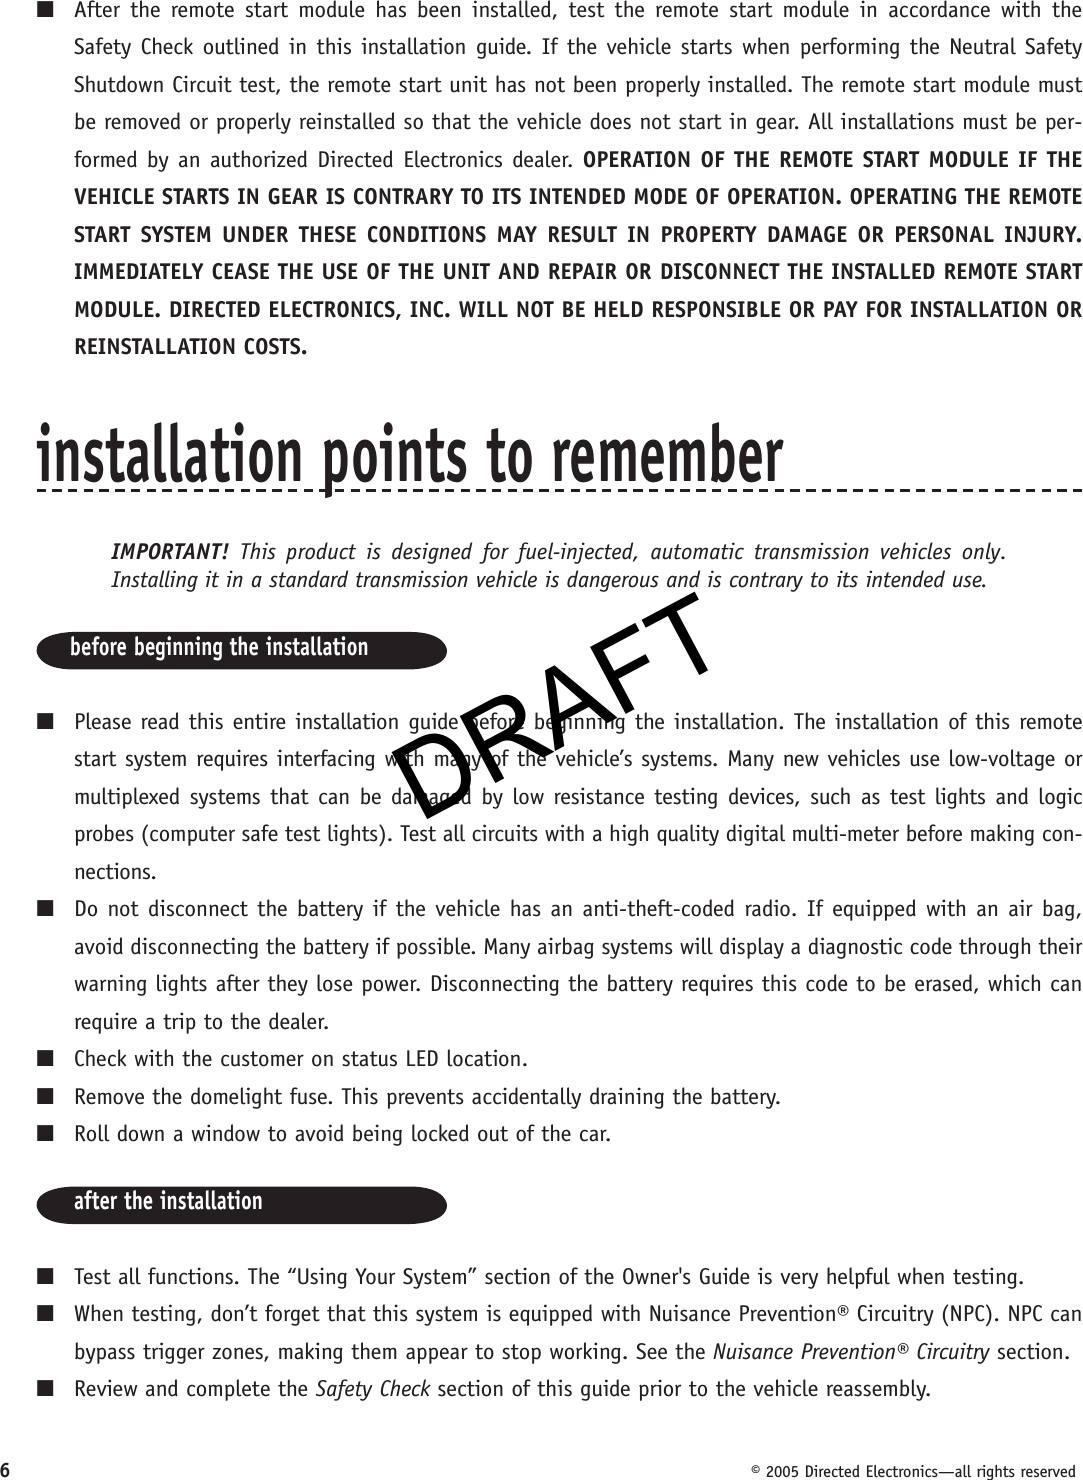 DRAFT6  © 2005 Directed Electronics—all rights reserved■  After the remote start module has been installed, test the remote start module in accordance with the Safety Check outlined in this installation guide. If the vehicle starts when performing the Neutral Safety Shutdown Circuit test, the remote start unit has not been properly installed. The remote start module must be removed or properly reinstalled so that the vehicle does not start in gear. All installations must be per-formed by an authorized Directed Electronics dealer. OPERATION OF THE REMOTE START MODULE IF THE VEHICLE STARTS IN GEAR IS CONTRARY TO ITS INTENDED MODE OF OPERATION. OPERATING THE REMOTE START SYSTEM UNDER THESE CONDITIONS MAY RESULT IN PROPERTY DAMAGE OR PERSONAL INJURY. IMMEDIATELY CEASE THE USE OF THE UNIT AND REPAIR OR DISCONNECT THE INSTALLED REMOTE START MODULE. DIRECTED ELECTRONICS, INC. WILL NOT BE HELD RESPONSIBLE OR PAY FOR INSTALLATION OR REINSTALLATION COSTS.installation points to rememberIMPORTANT!  This product is designed for fuel-injected, automatic transmission vehicles only. Installing it in a standard transmission vehicle is dangerous and is contrary to its intended use.before beginning the installation■  Please read this entire installation guide before beginning the installation. The installation of this remote start system requires interfacing with many of the vehicle’s systems. Many new vehicles use low-voltage or multiplexed systems that can be damaged by low resistance testing devices, such as test lights and logic probes (computer safe test lights). Test all circuits with a high quality digital multi-meter before making con-nections.■  Do not disconnect the battery if the vehicle has an anti-theft-coded radio. If equipped with an air bag, avoid disconnecting the battery if possible. Many airbag systems will display a diagnostic code through their warning lights after they lose power. Disconnecting the battery requires this code to be erased, which can require a trip to the dealer.■  Check with the customer on status LED location.■  Remove the domelight fuse. This prevents accidentally draining the battery.■  Roll down a window to avoid being locked out of the car.after the installation■  Test all functions. The “Using Your System” section of the Owner&apos;s Guide is very helpful when testing.■  When testing, don’t forget that this system is equipped with Nuisance Prevention® Circuitry (NPC). NPC can bypass trigger zones, making them appear to stop working. See the Nuisance Prevention® Circuitry section.■  Review and complete the Safety Check section of this guide prior to the vehicle reassembly.DRAFT